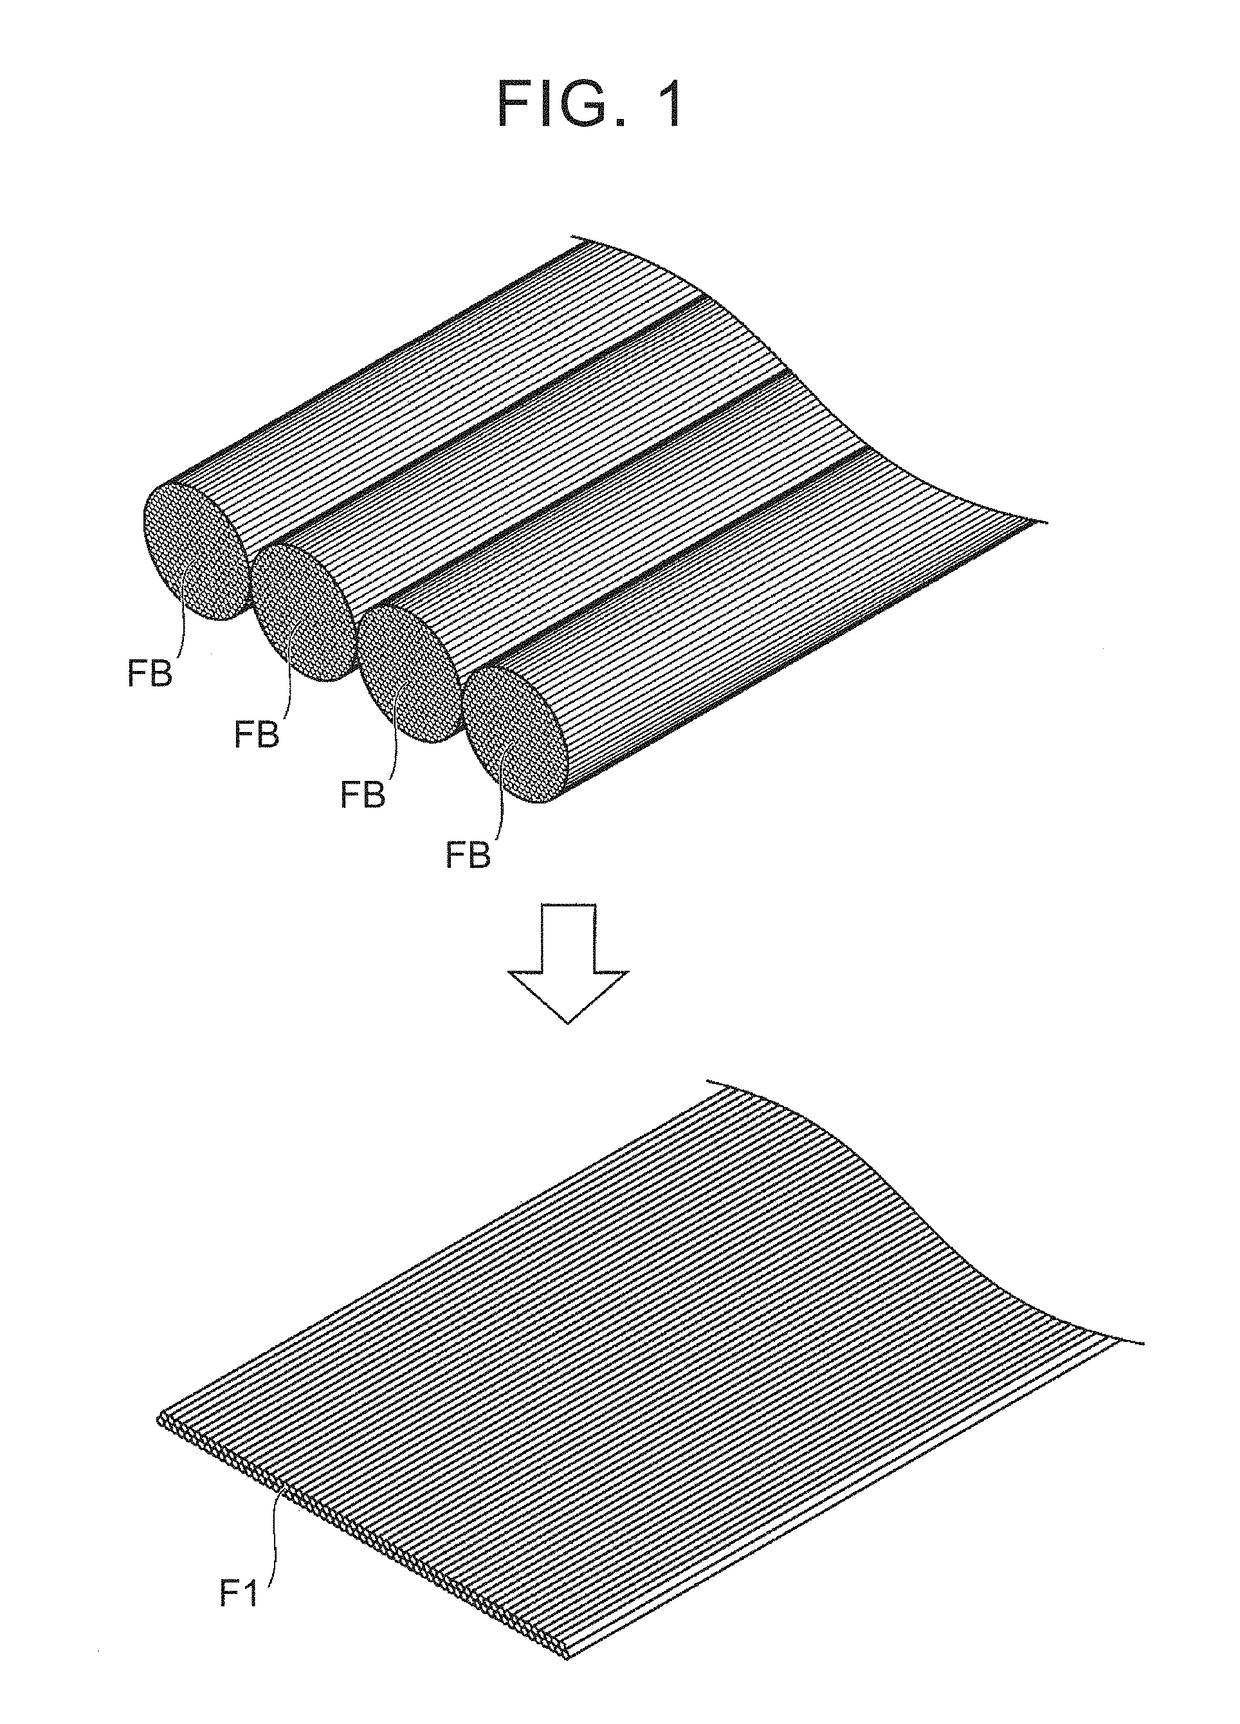 Production method of producing fiber-reinforced resin molding